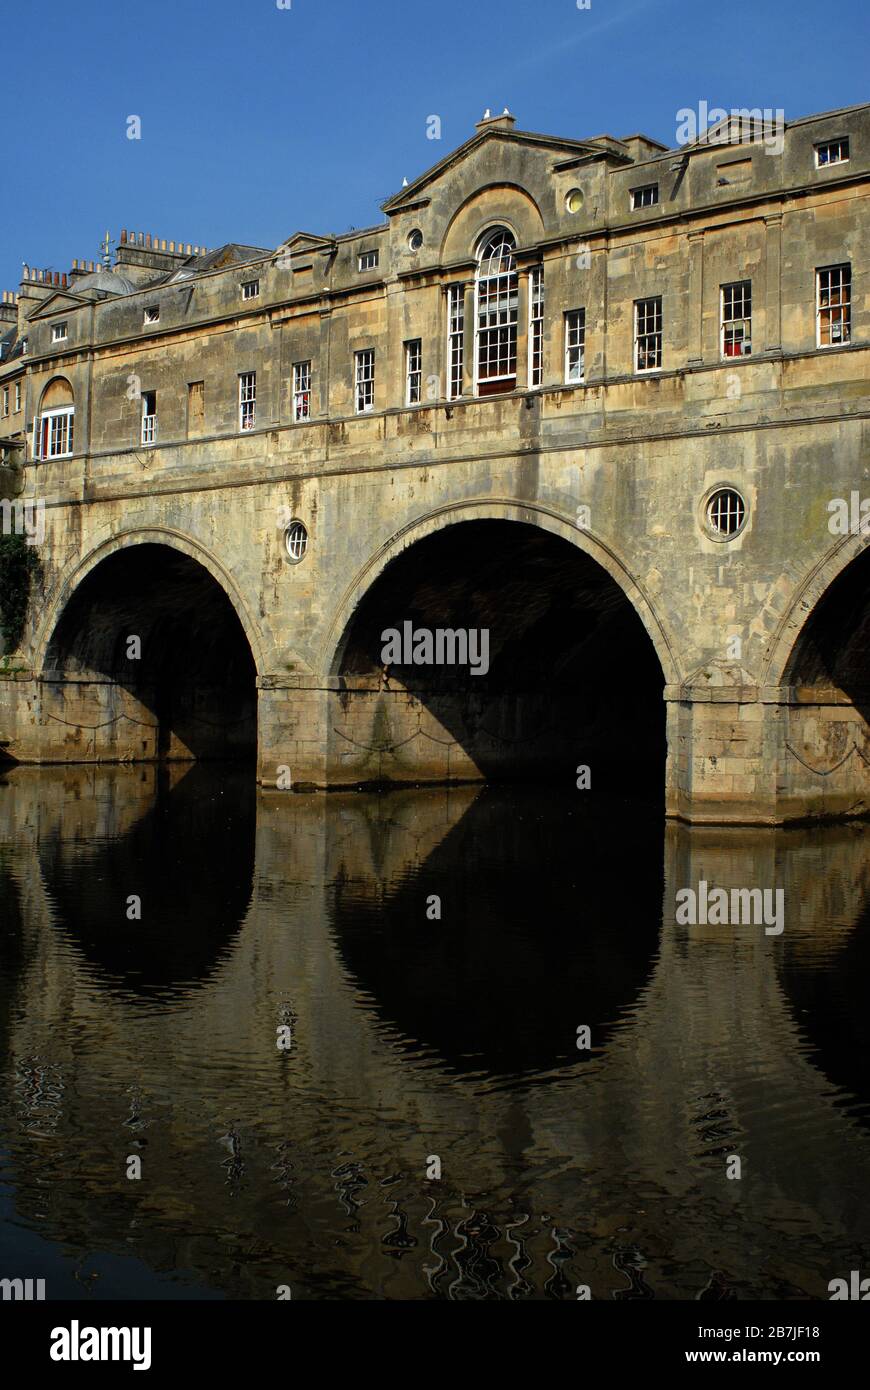 Pulteney Bridge is a rarity. It is one of only four in the world lined by shops on both sides. Bath, North East Somerset Council. United Kingdom (UK). Stock Photo